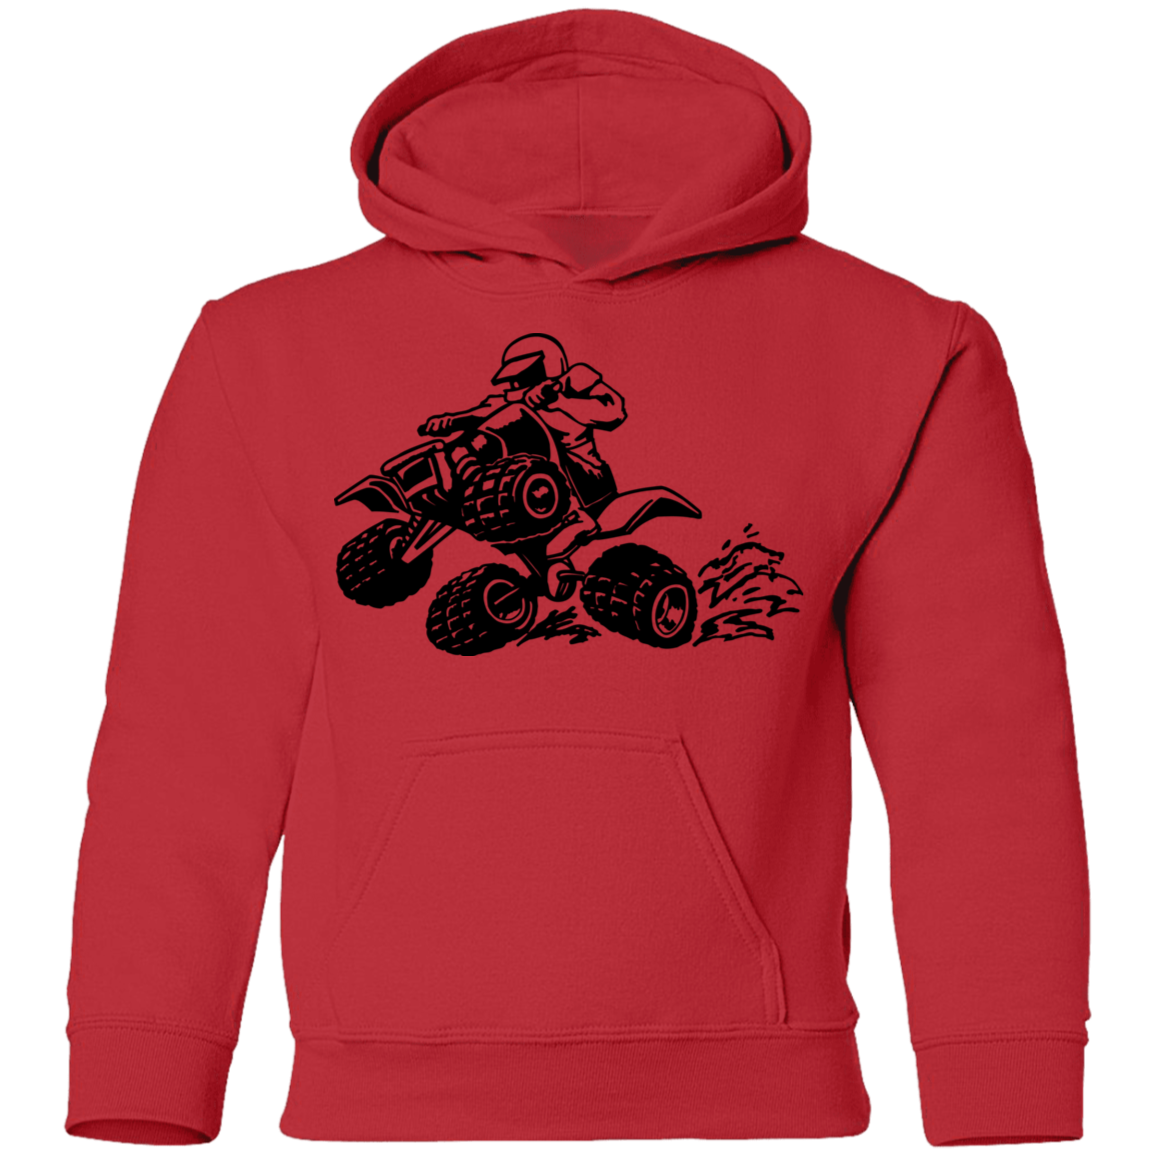 Youth 4-wheeler pullover Hoodie